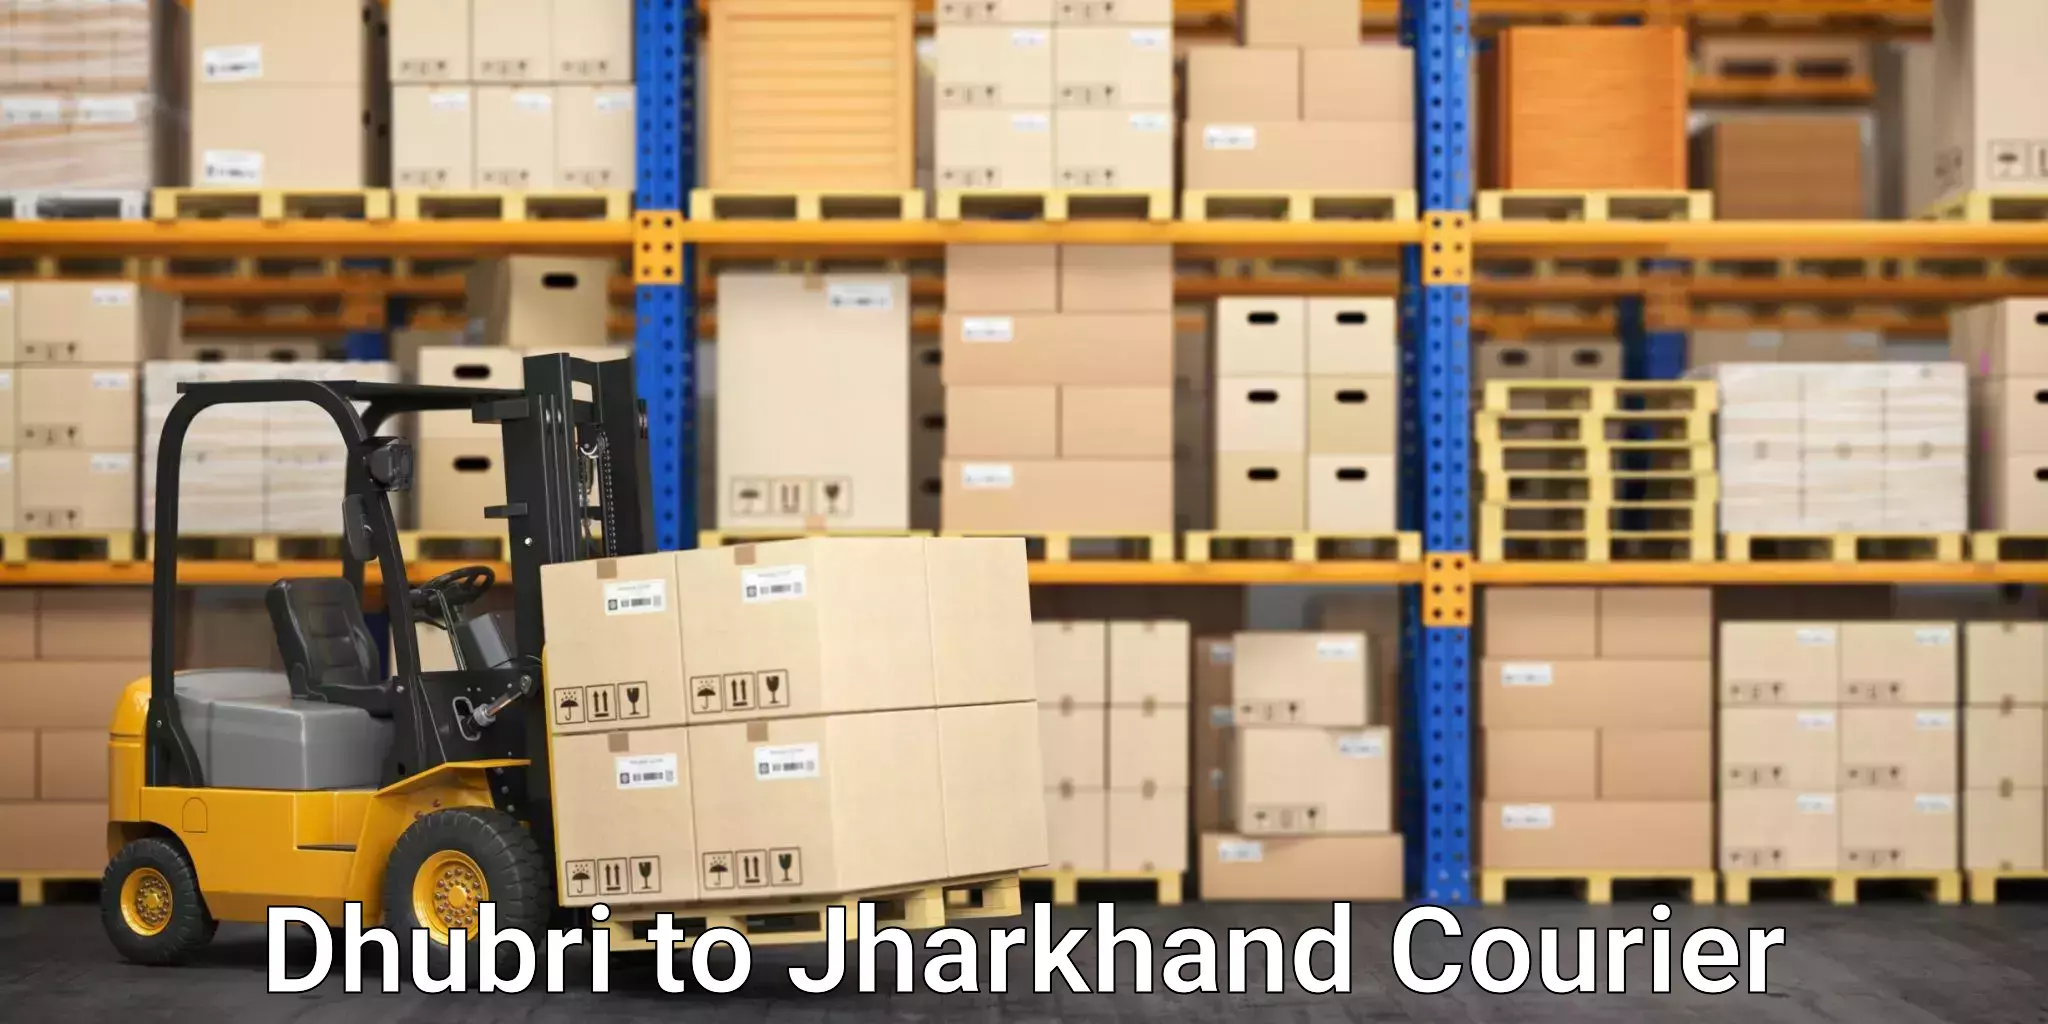 Customizable delivery plans in Dhubri to Jharkhand